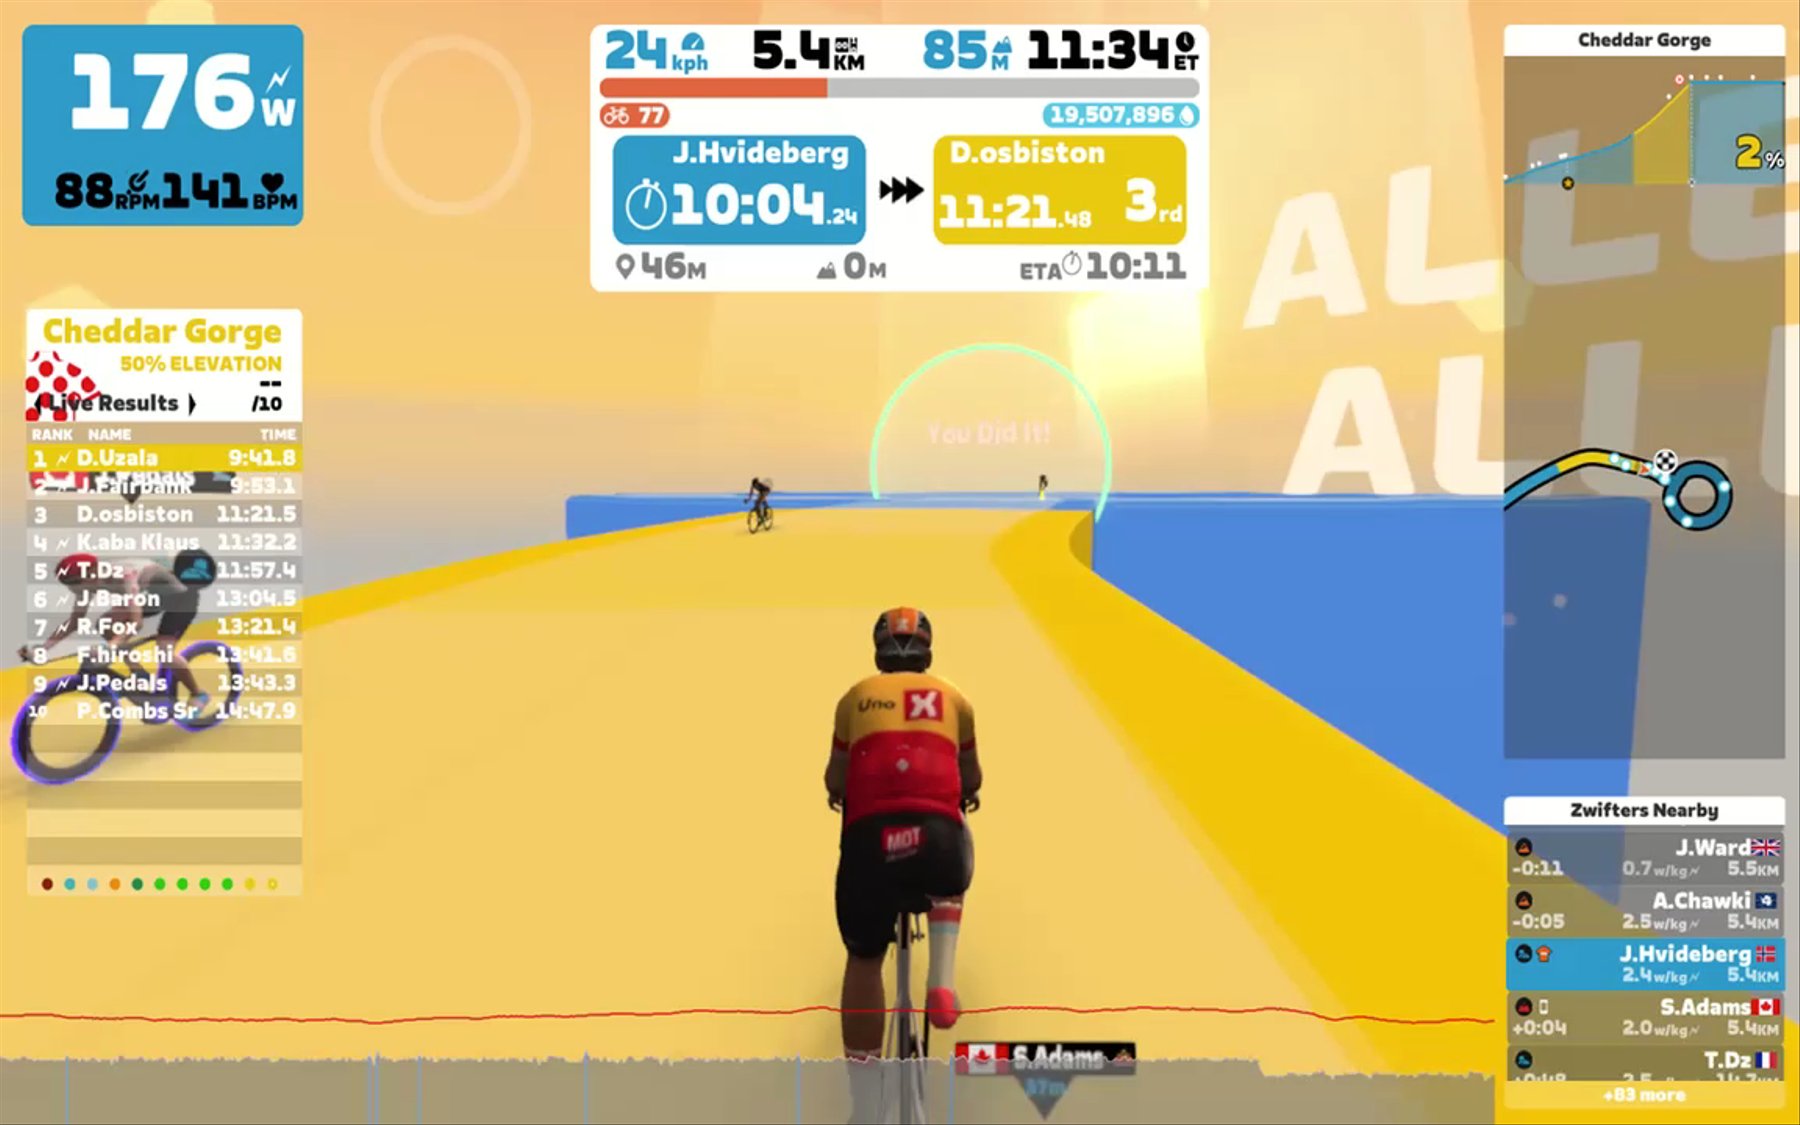 Zwift - Climb Portal: Cheddar Gorge at 50% Elevation in Watopia